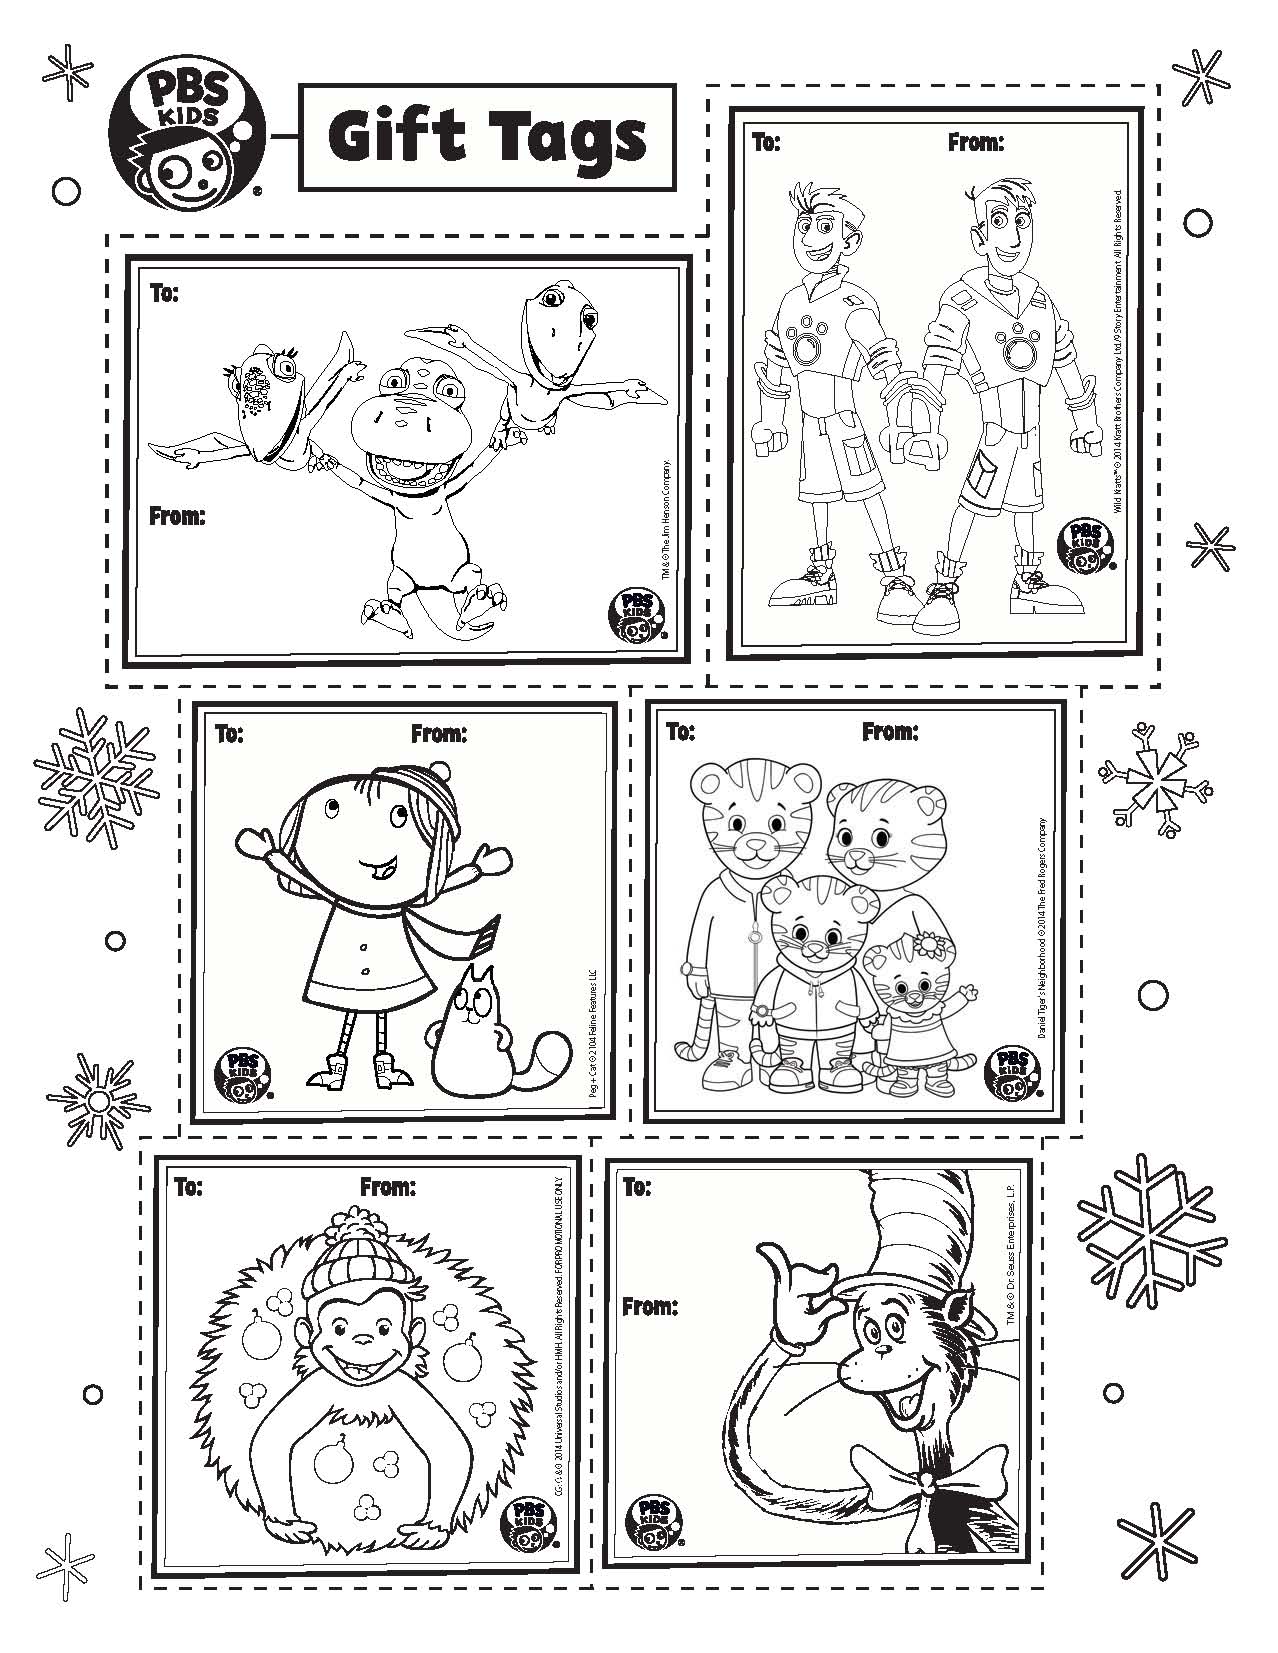 pbs kids gift tags 2_Page_2